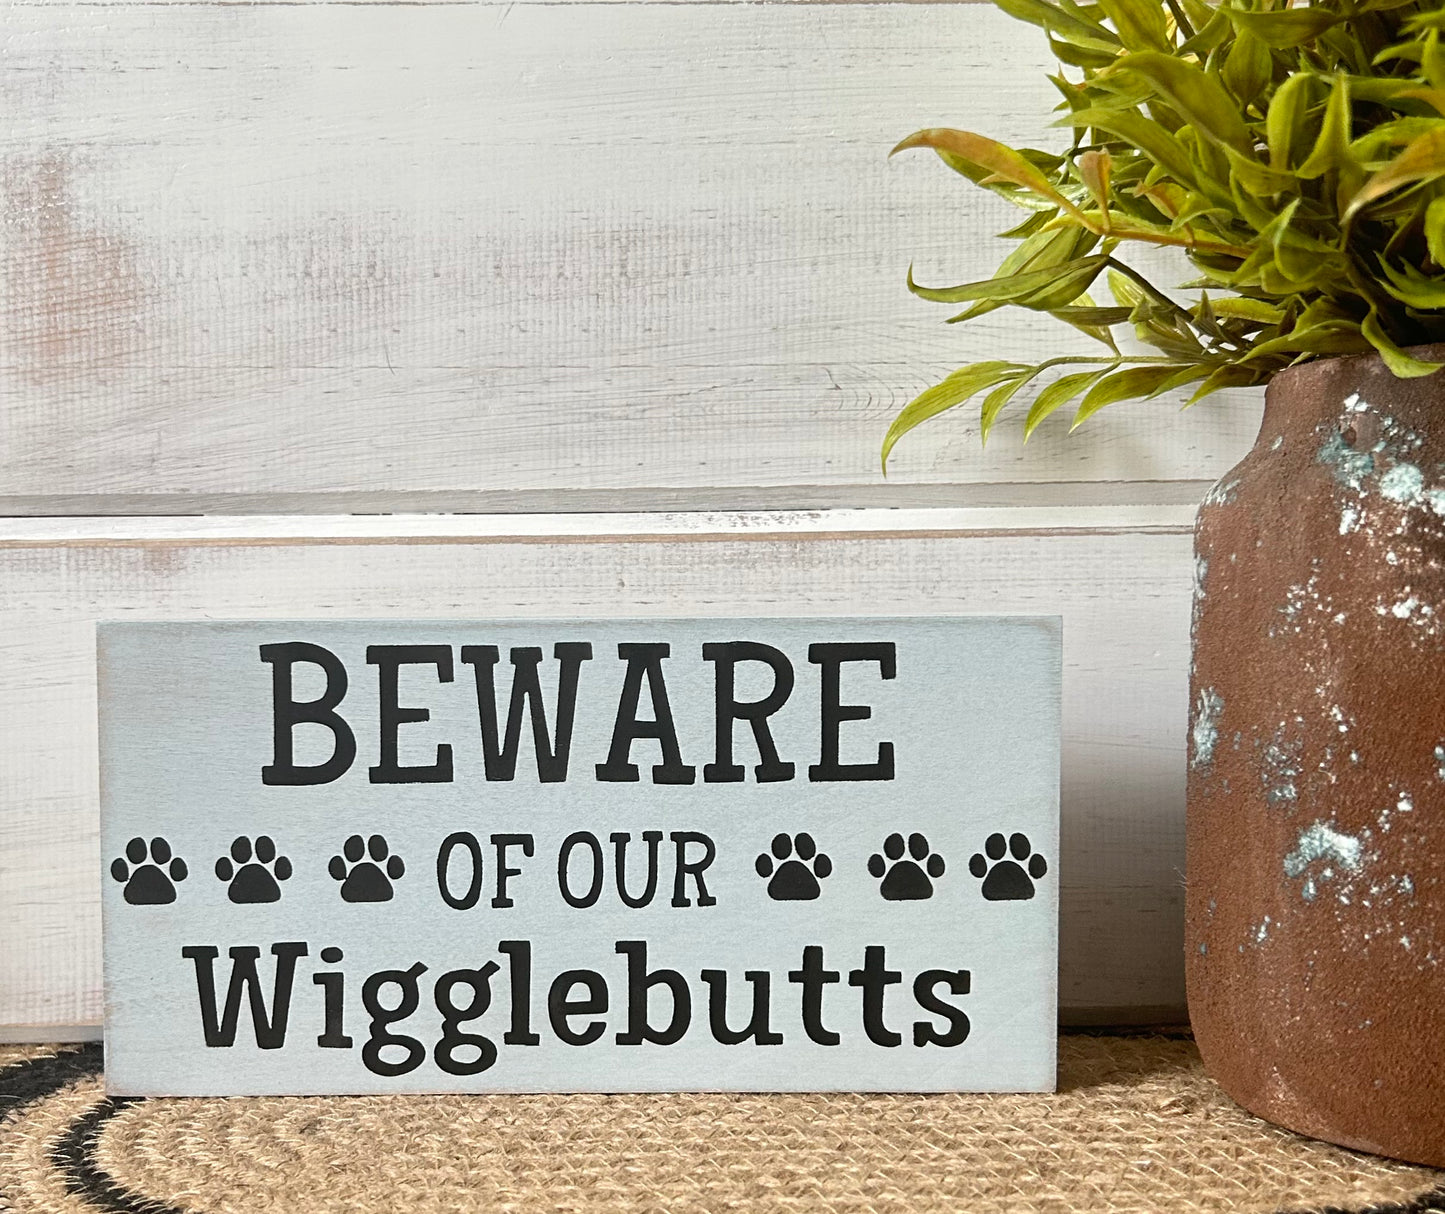 Beware of Our Wigglebutts - Rustic Wood Shelf Sitter